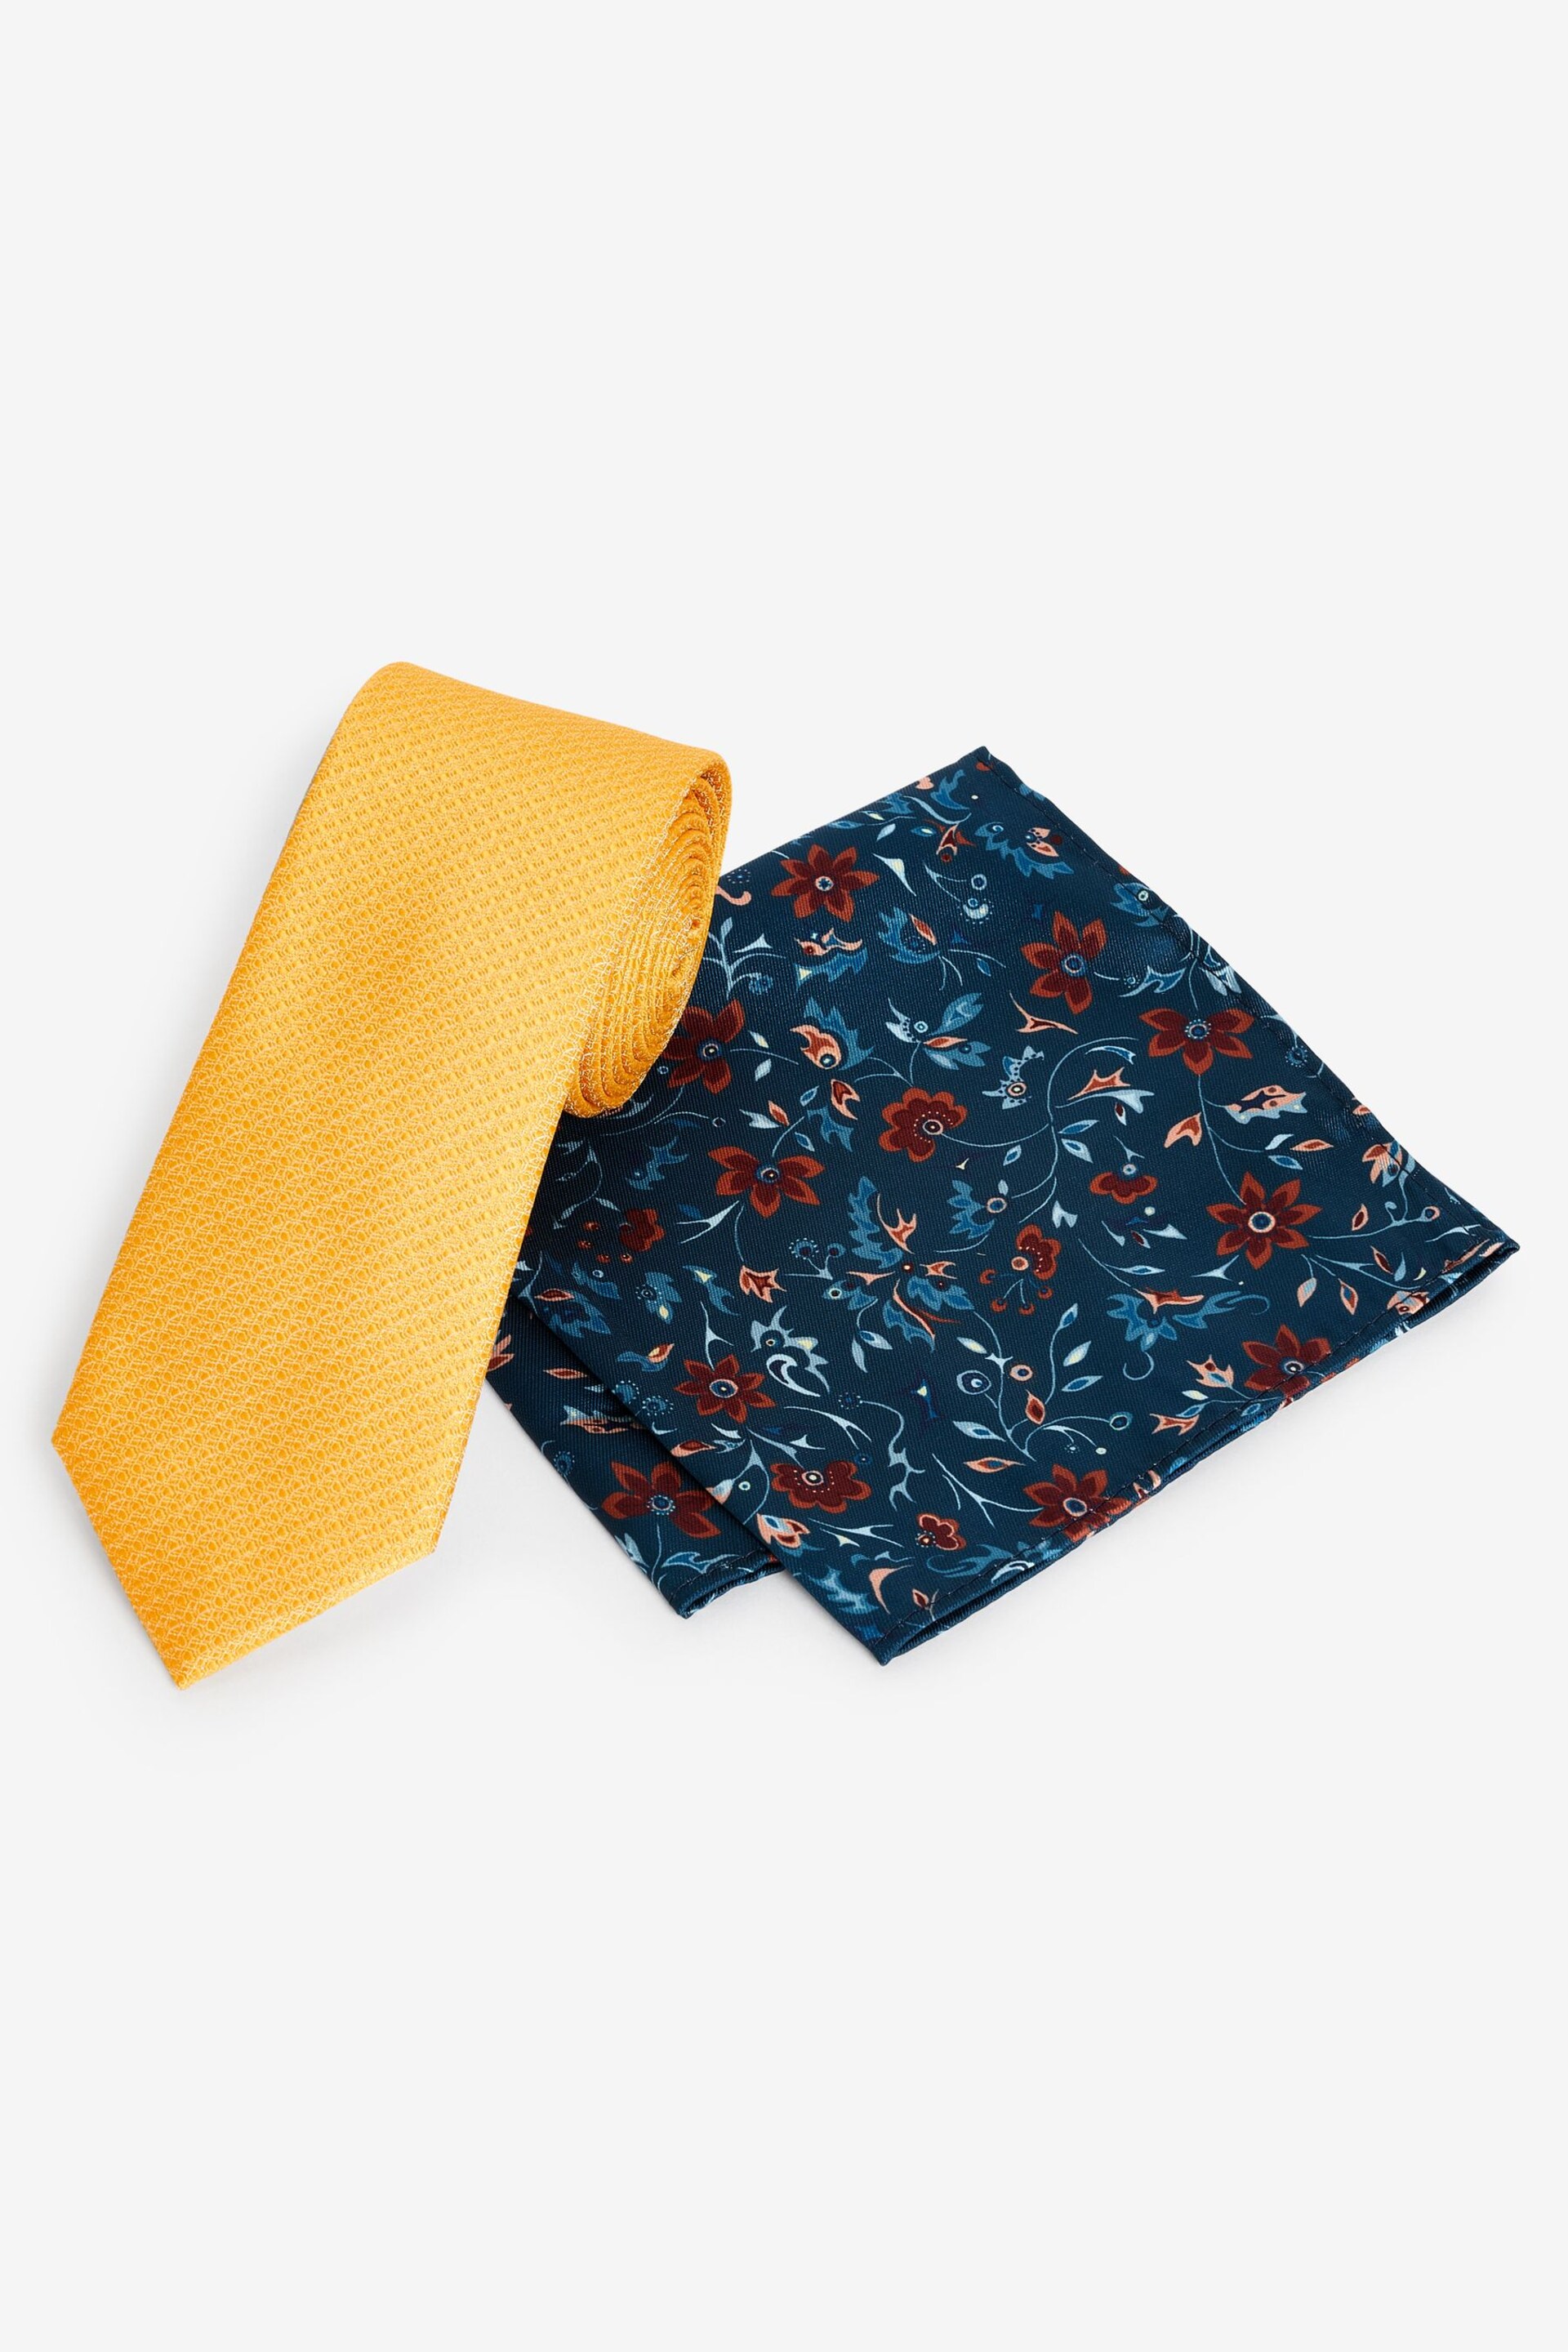 Yellow/Navy Blue Floral Slim Tie And Pocket Square Set - Image 1 of 5